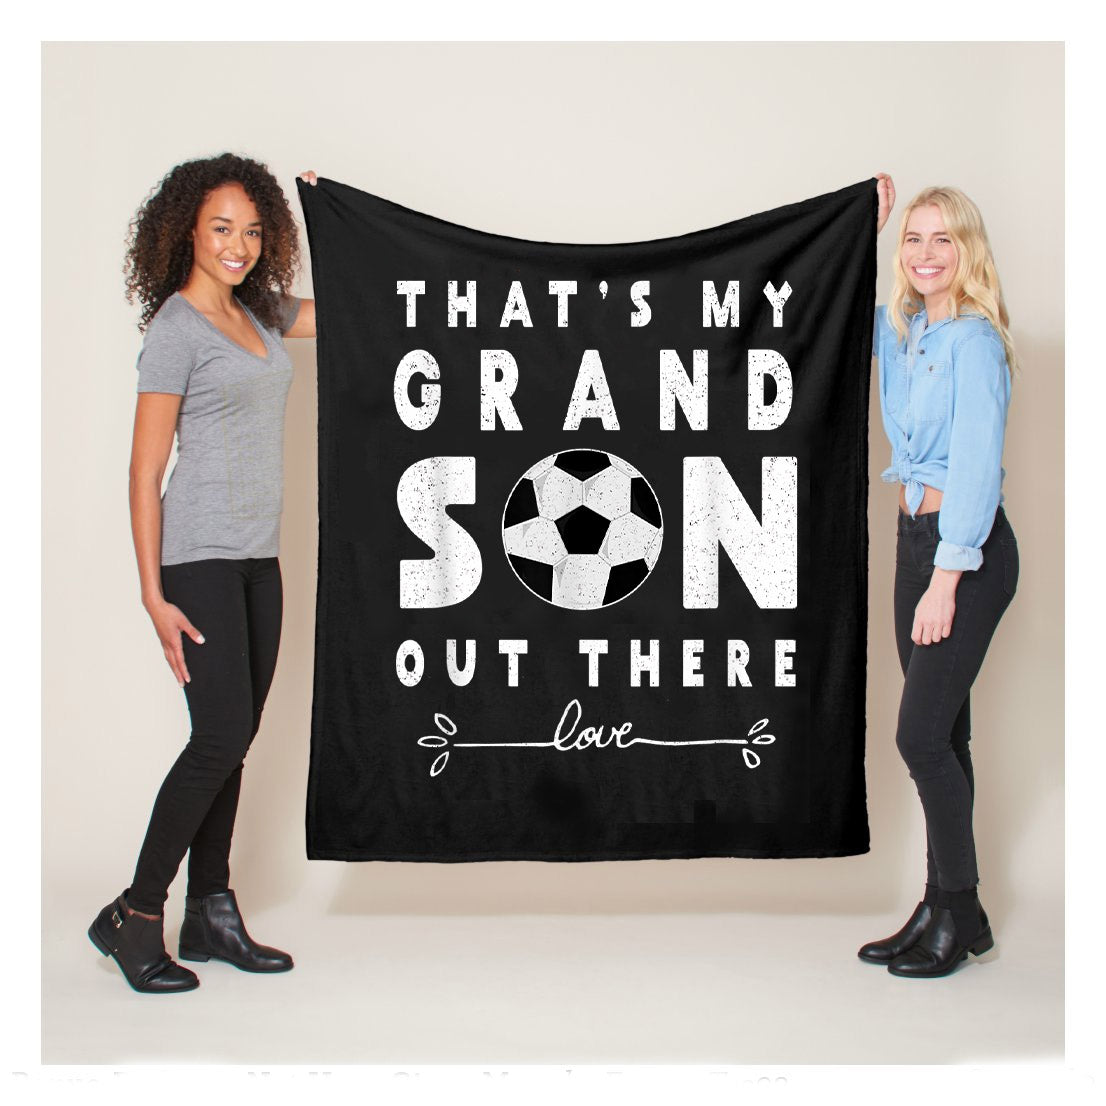 Thats My Grandson Out There Soccer Sherpa Blanket,  Soccer Blankets, Soccer Gifts, Happy Fathers Day Gift Ideas For Grandpa